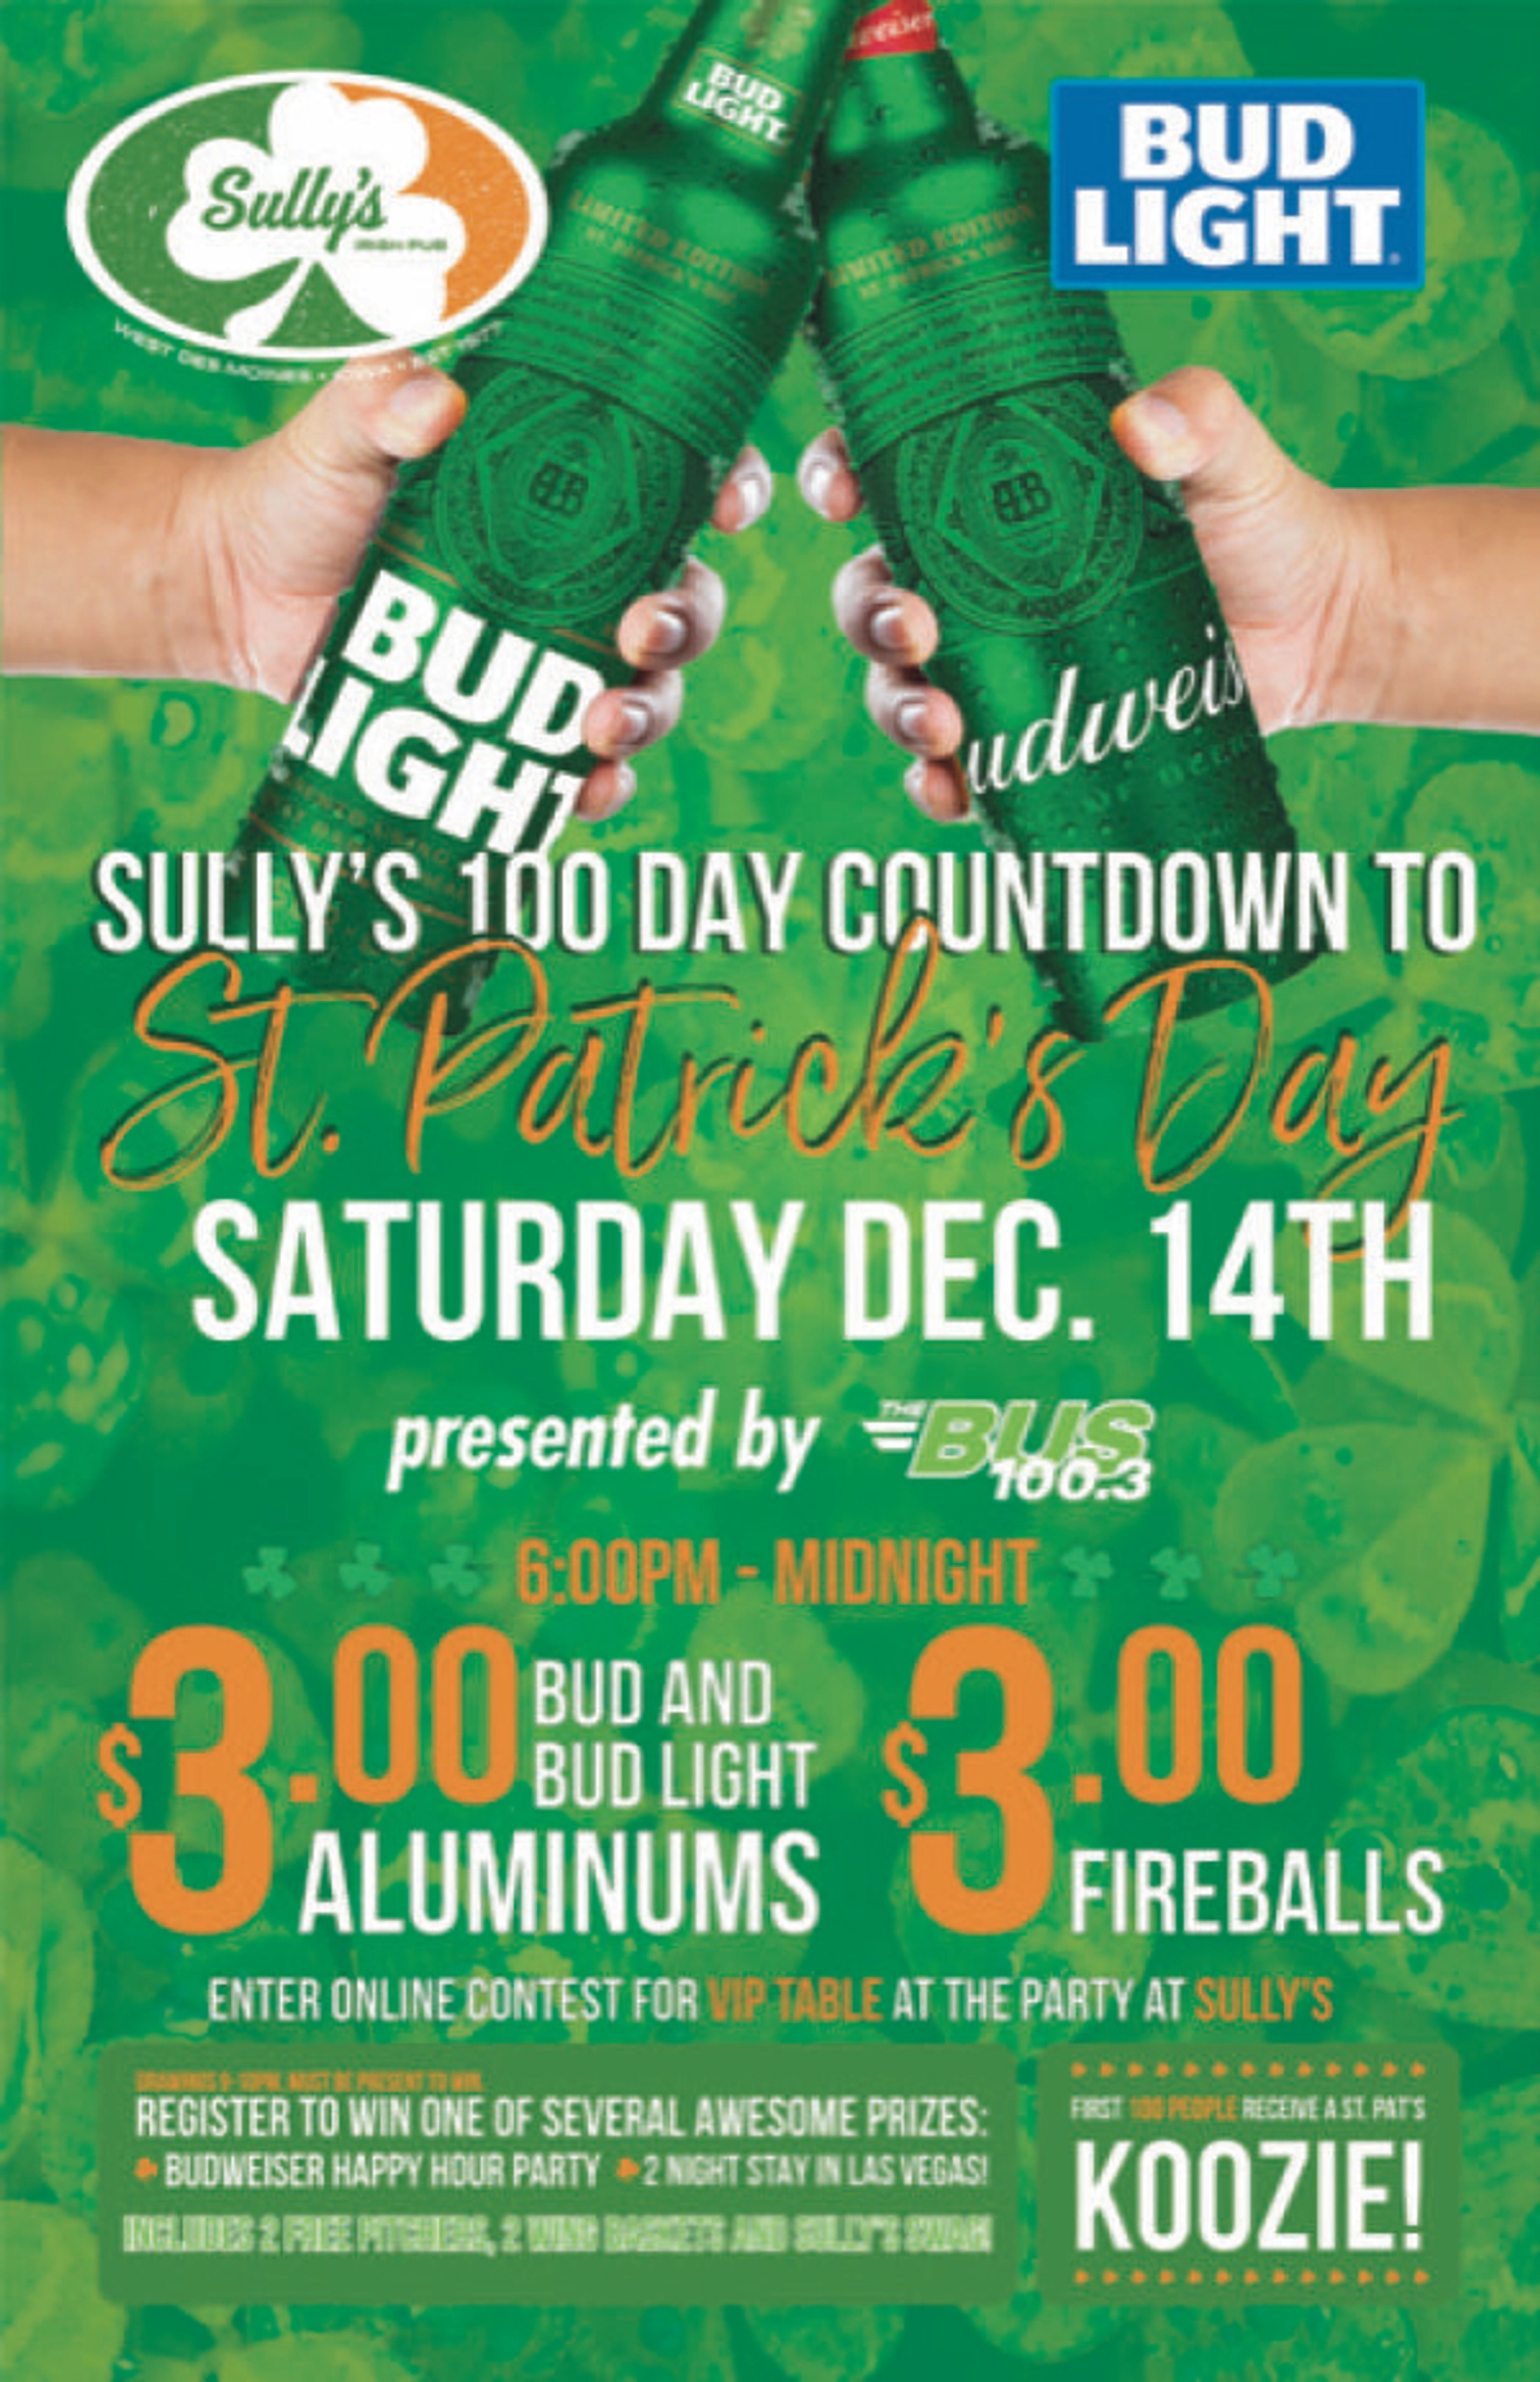 WIN A VIP TABLE FOR SIX at SULLY'S 100 Day Countdown to St. Patricks Day Party, December 14th! - Thumbnail Image